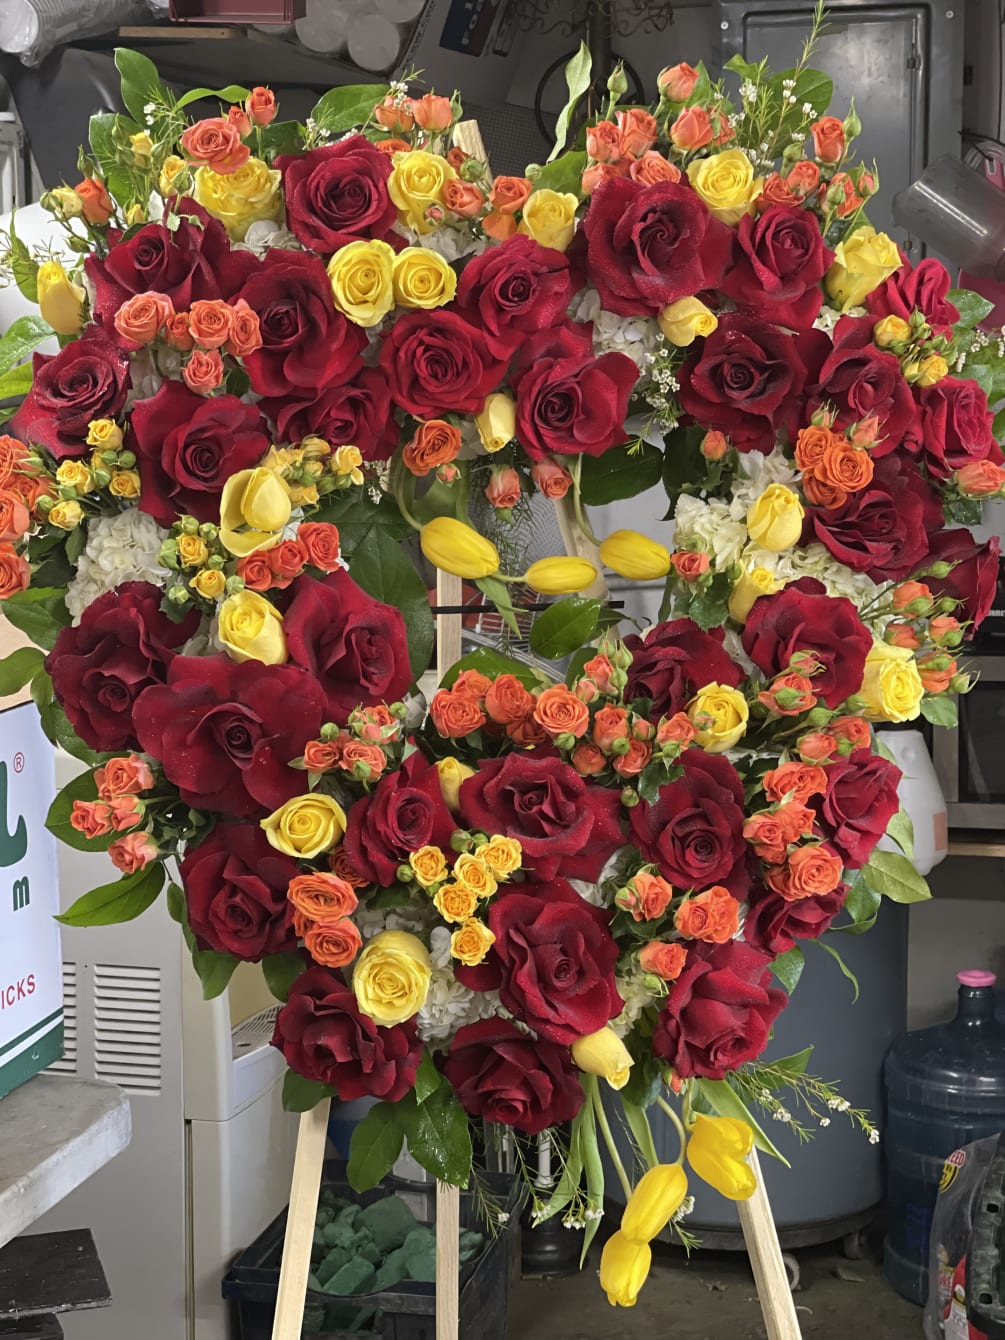 A beautiful heart shaped arrangement  full of roses spray noses and